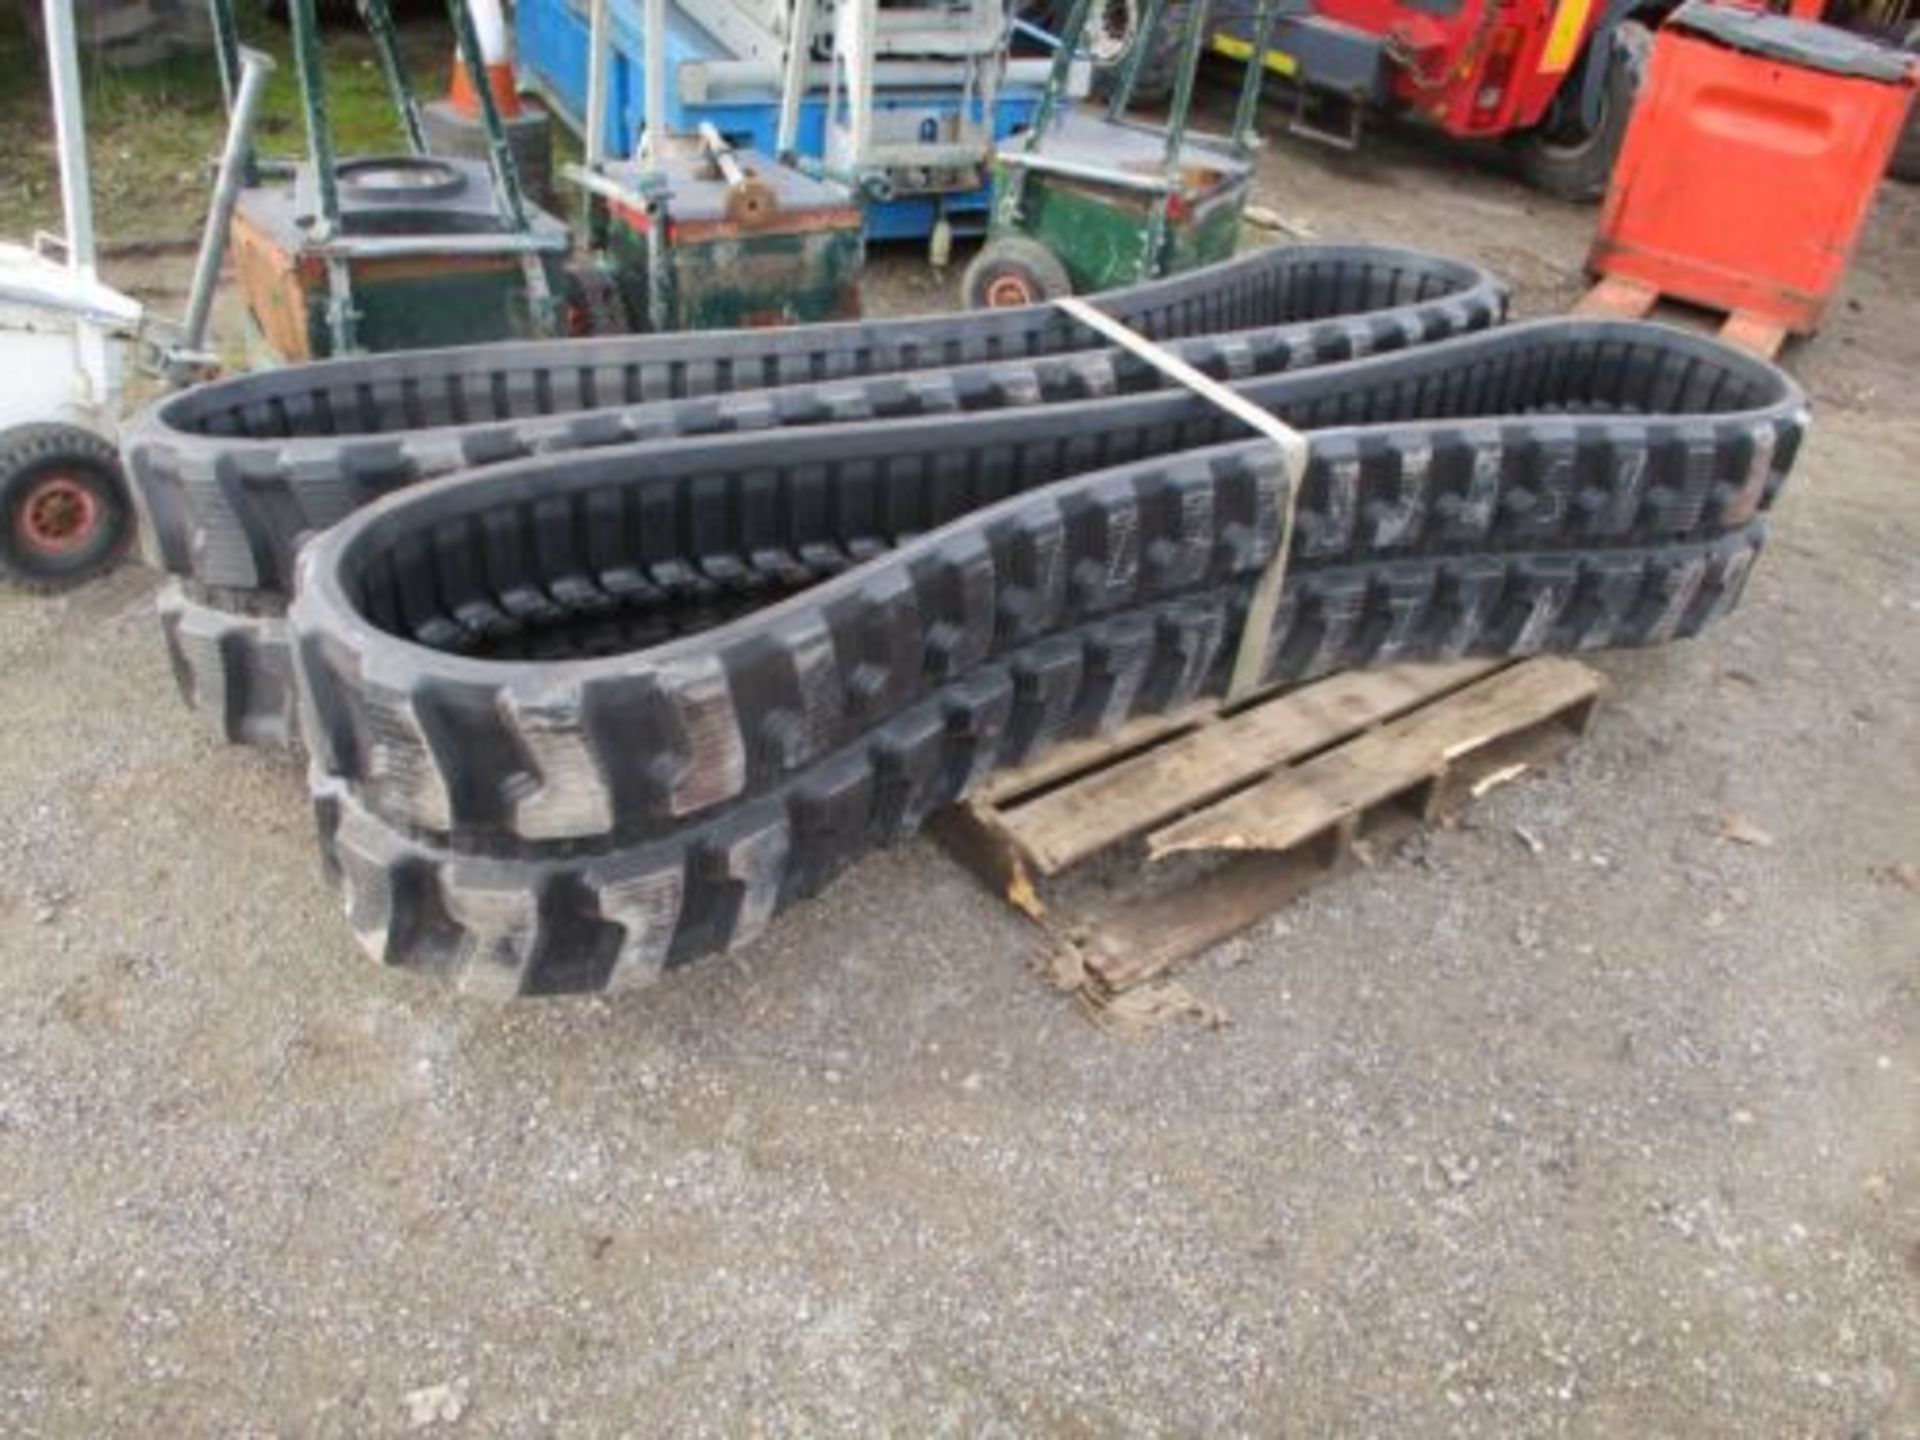 CAMOPLAST 450 71 80 RUBBER TRACK FOR EXCAVATOR DIGGER 450X71X80 - Image 3 of 7